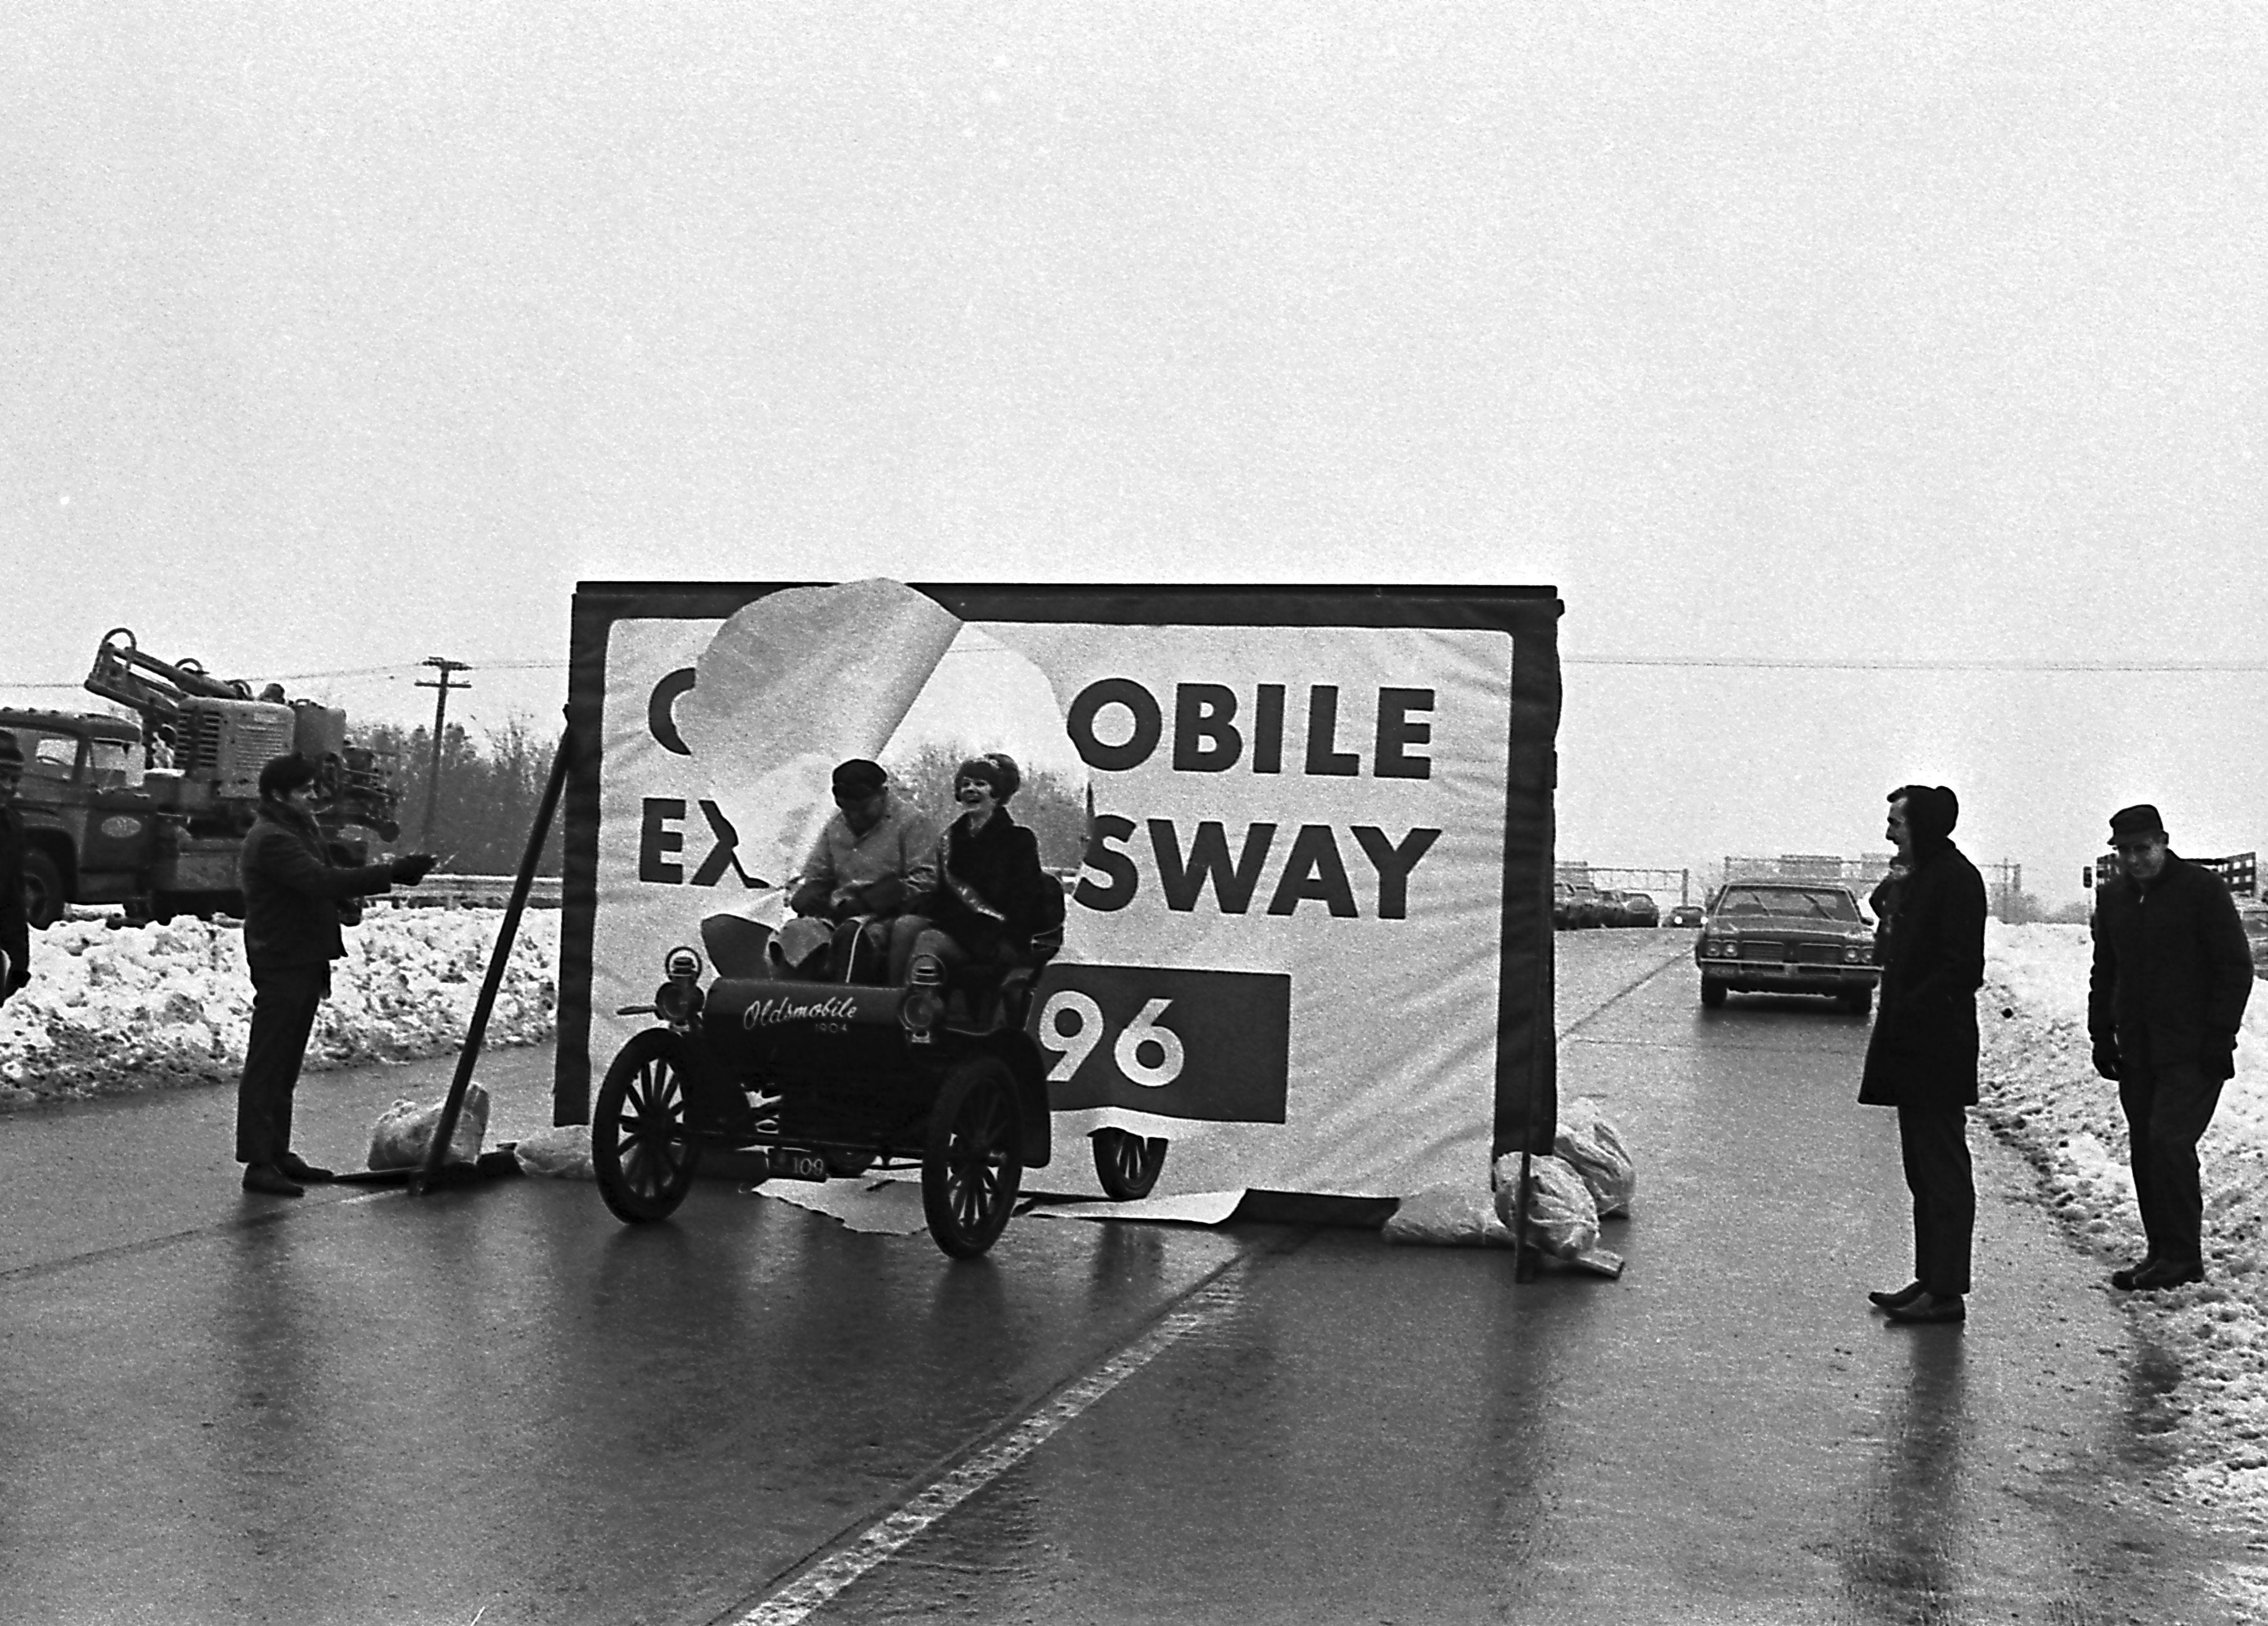 On Dec. 18, 1970, the new freeway, called the Oldsmobile Expressway, opened. It eased traffic flow in Lansing but cut through the heart of the city's largest black neighborhood, displacing many families.